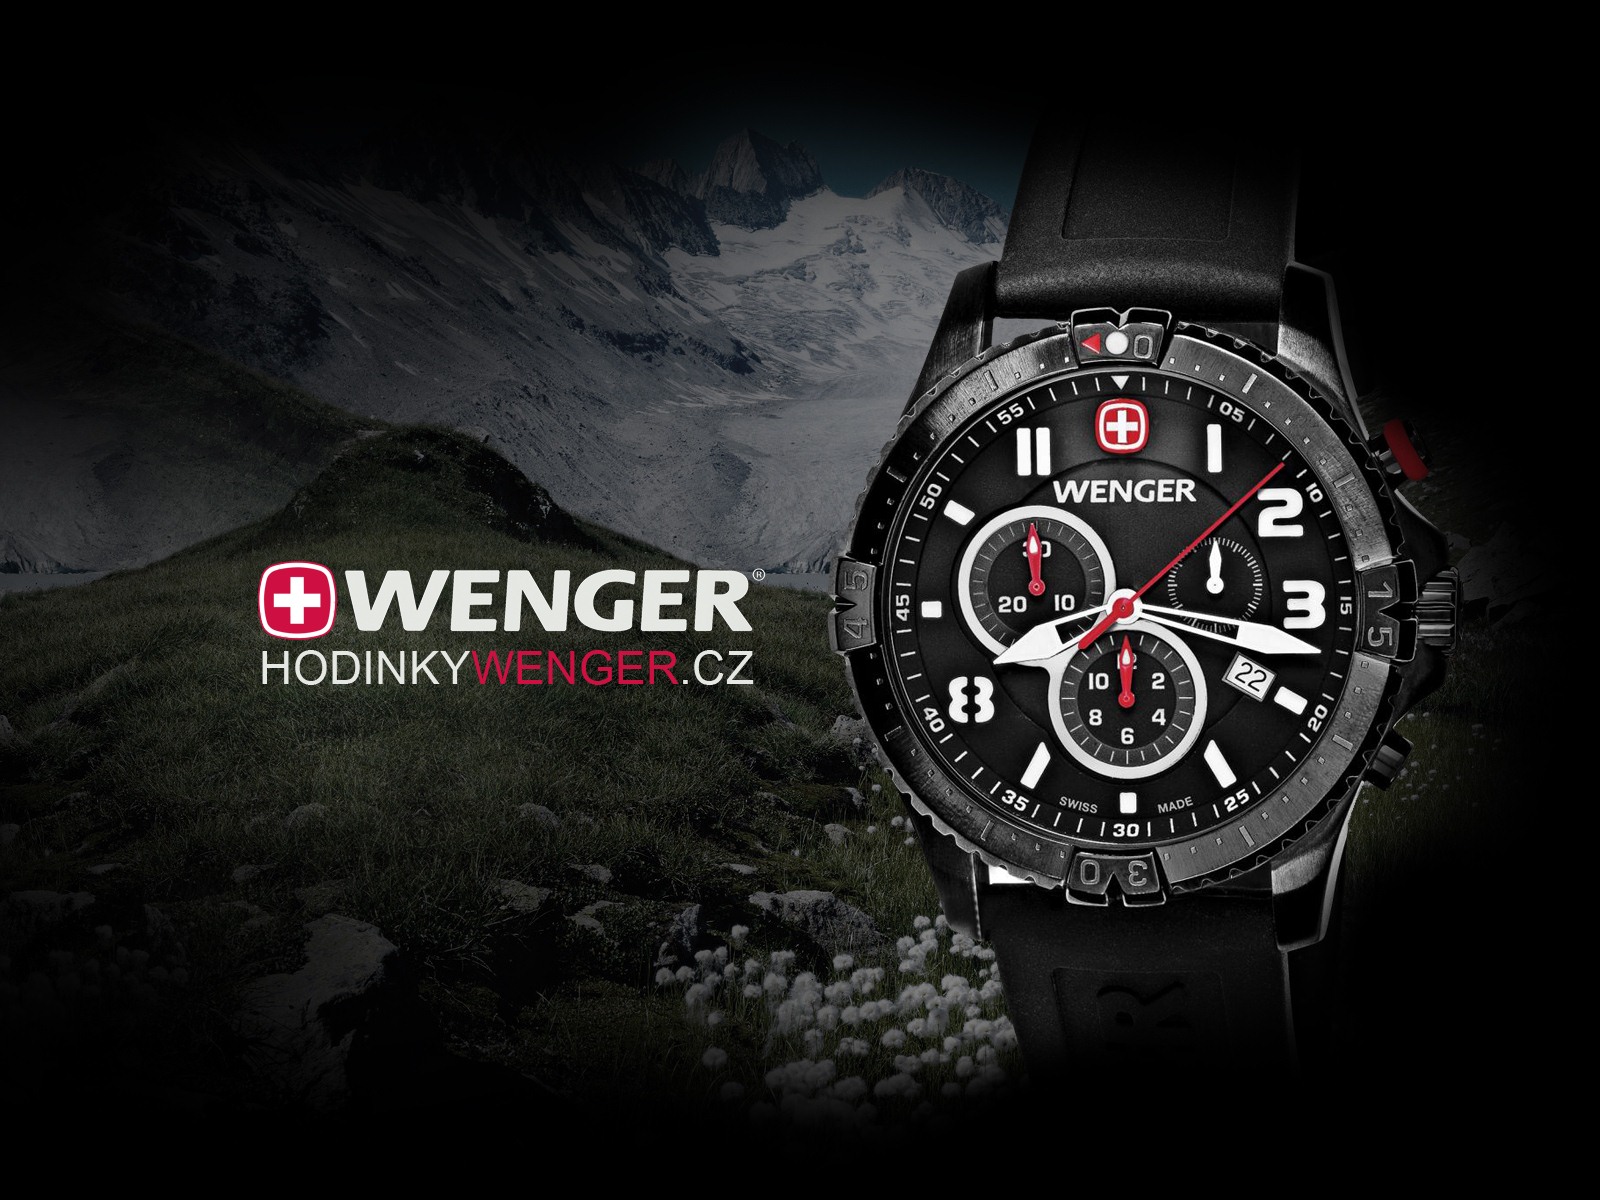 World famous watches wallpapers (1) #1 - 1600x1200